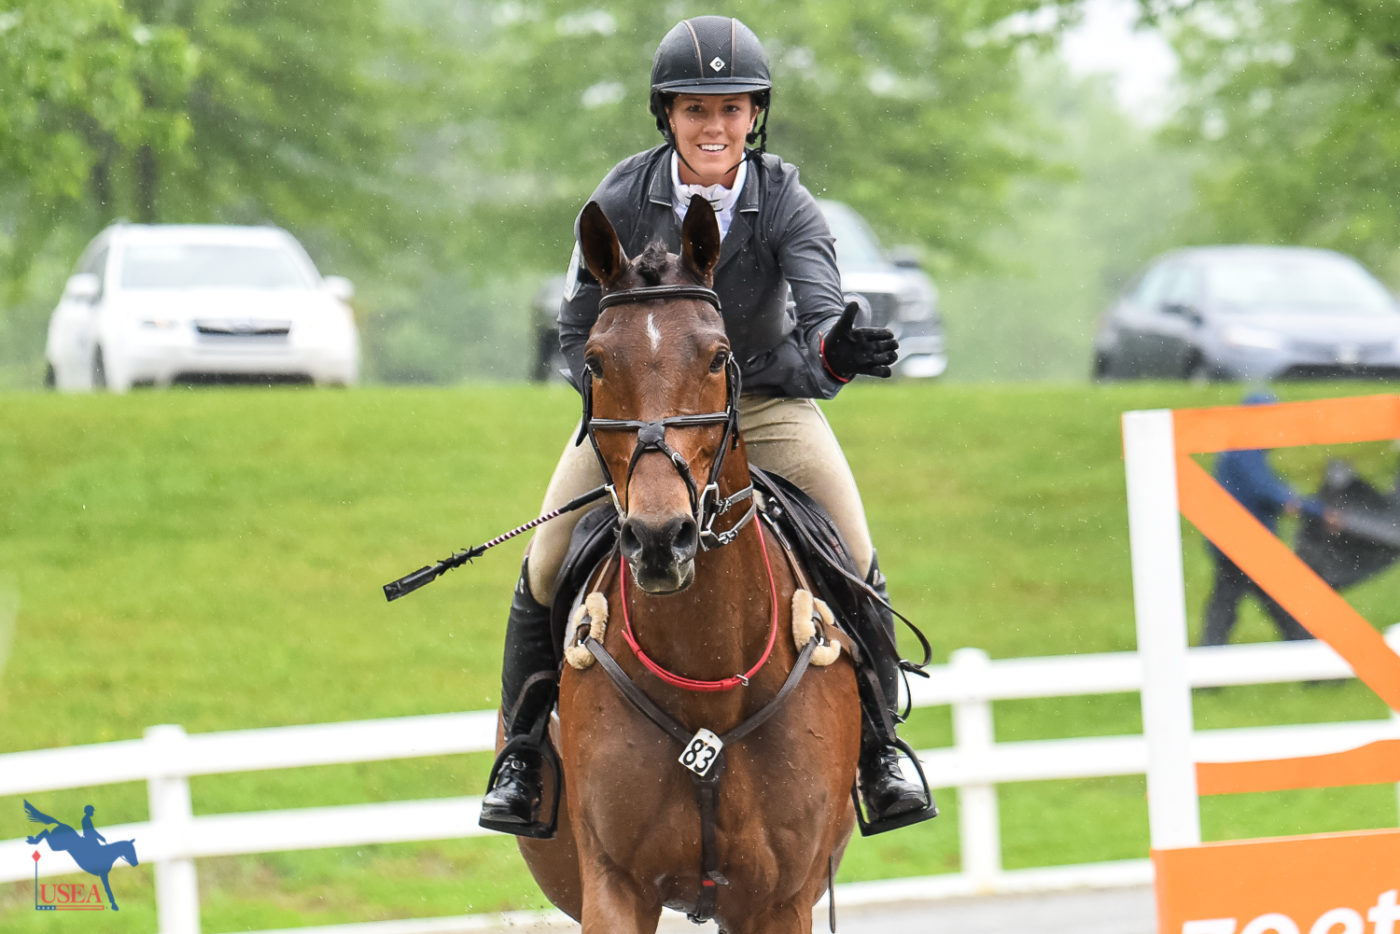 Despite the rain, Fylicia Barr and "Sunny" were all smiles after their winning show jumping round. USEA/Jessica Duffy Photo.